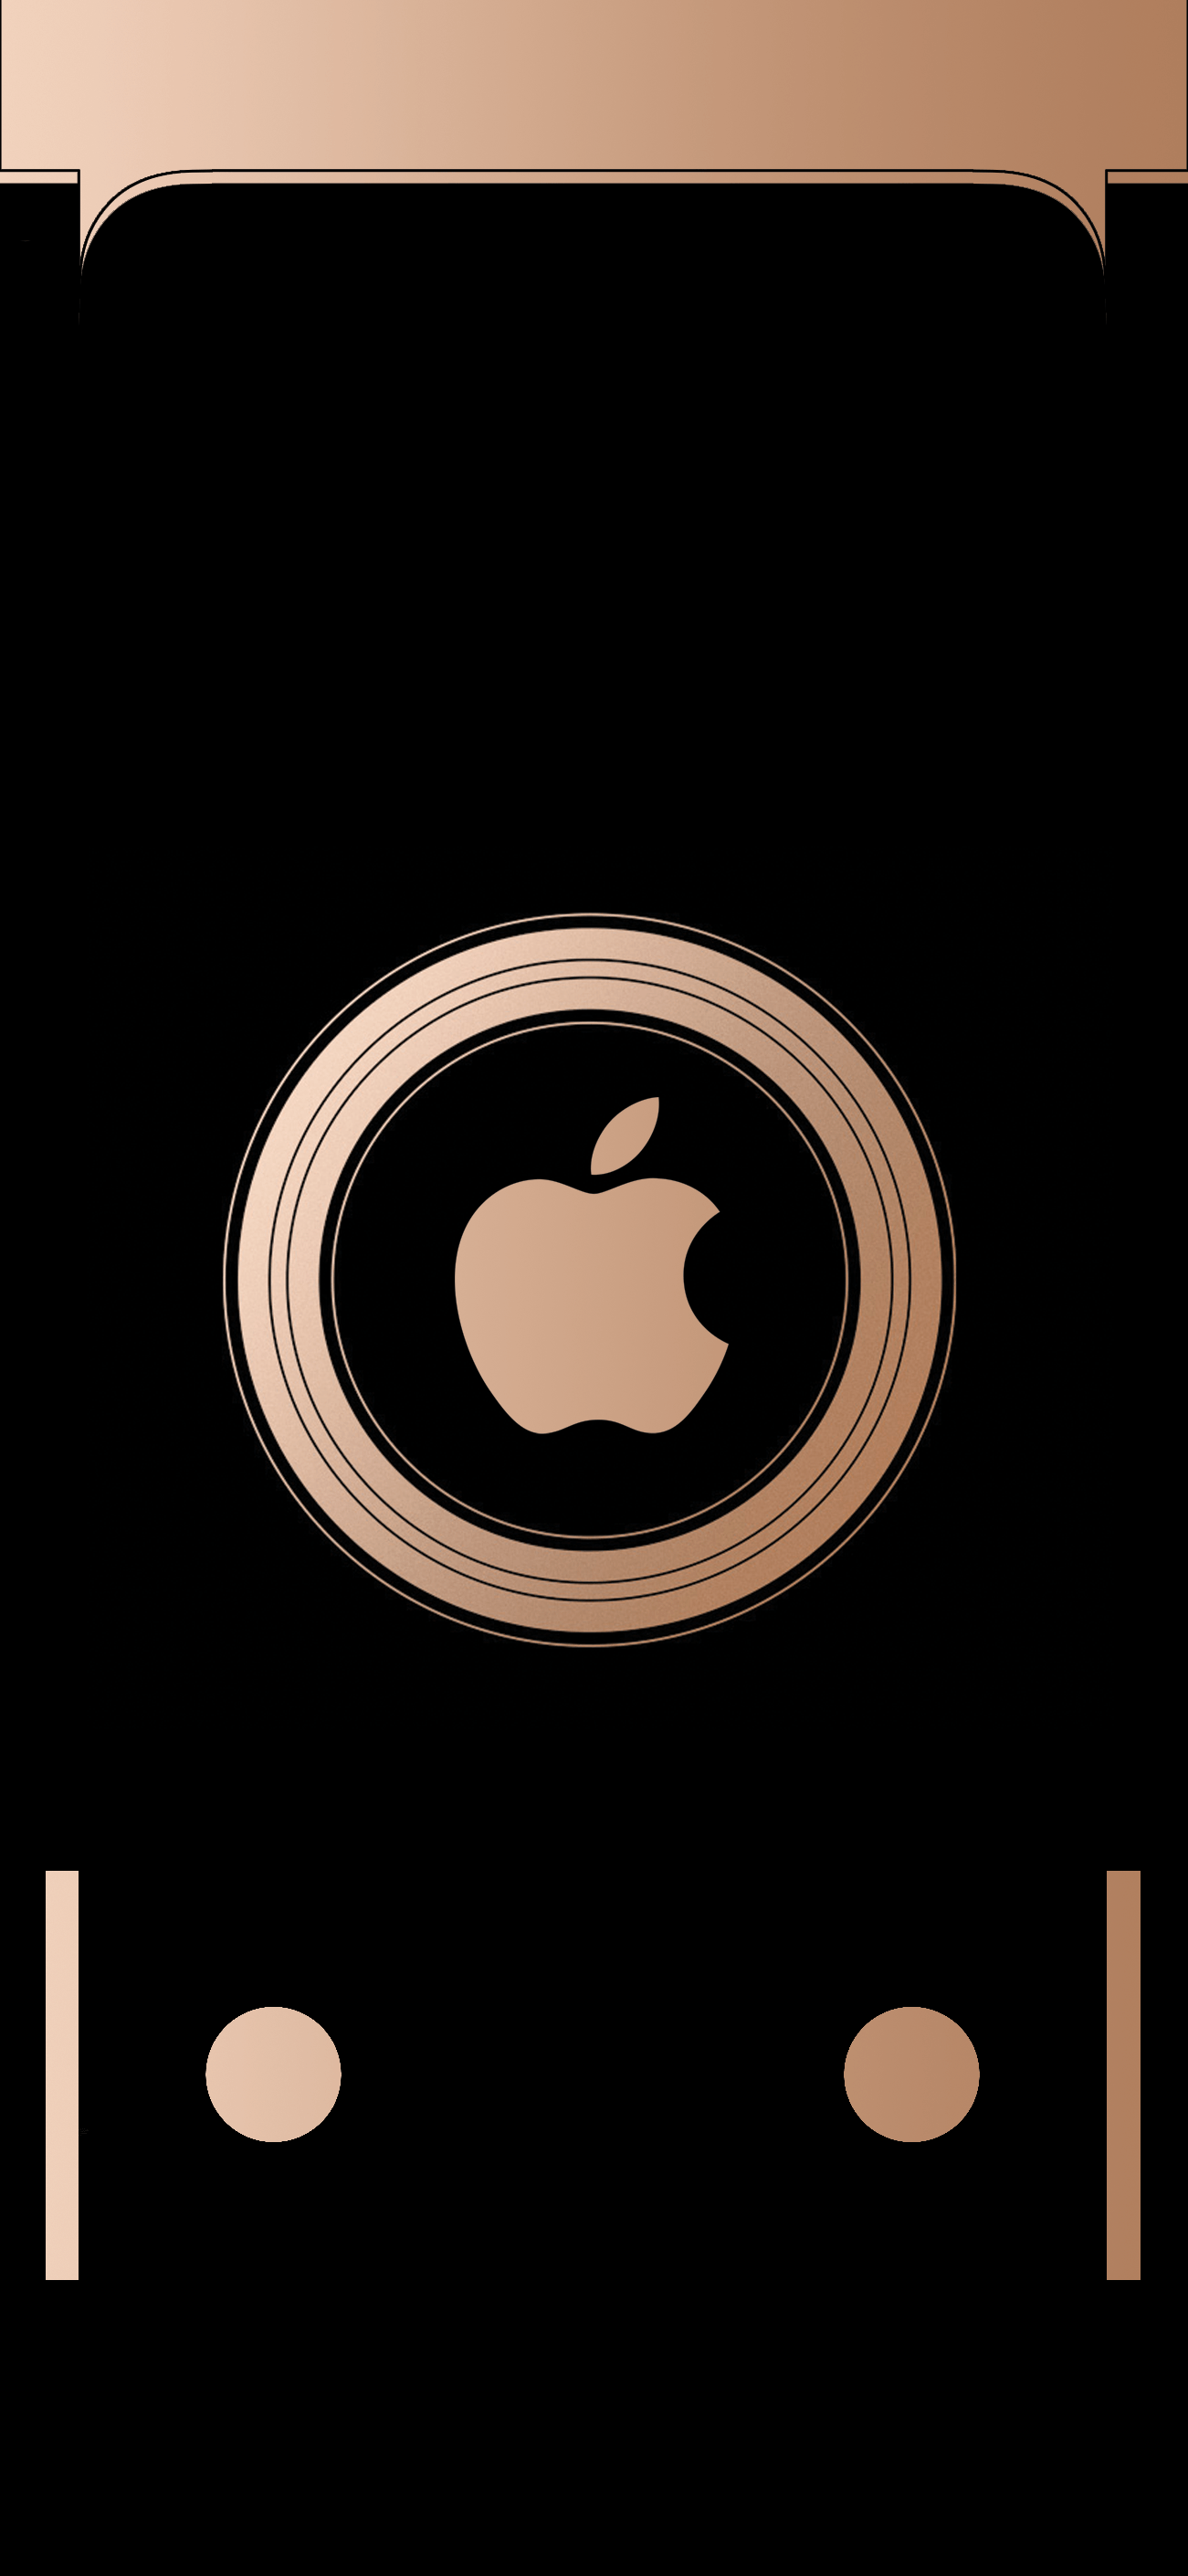 Iphon Logo - Gather round Apple event wallpapers